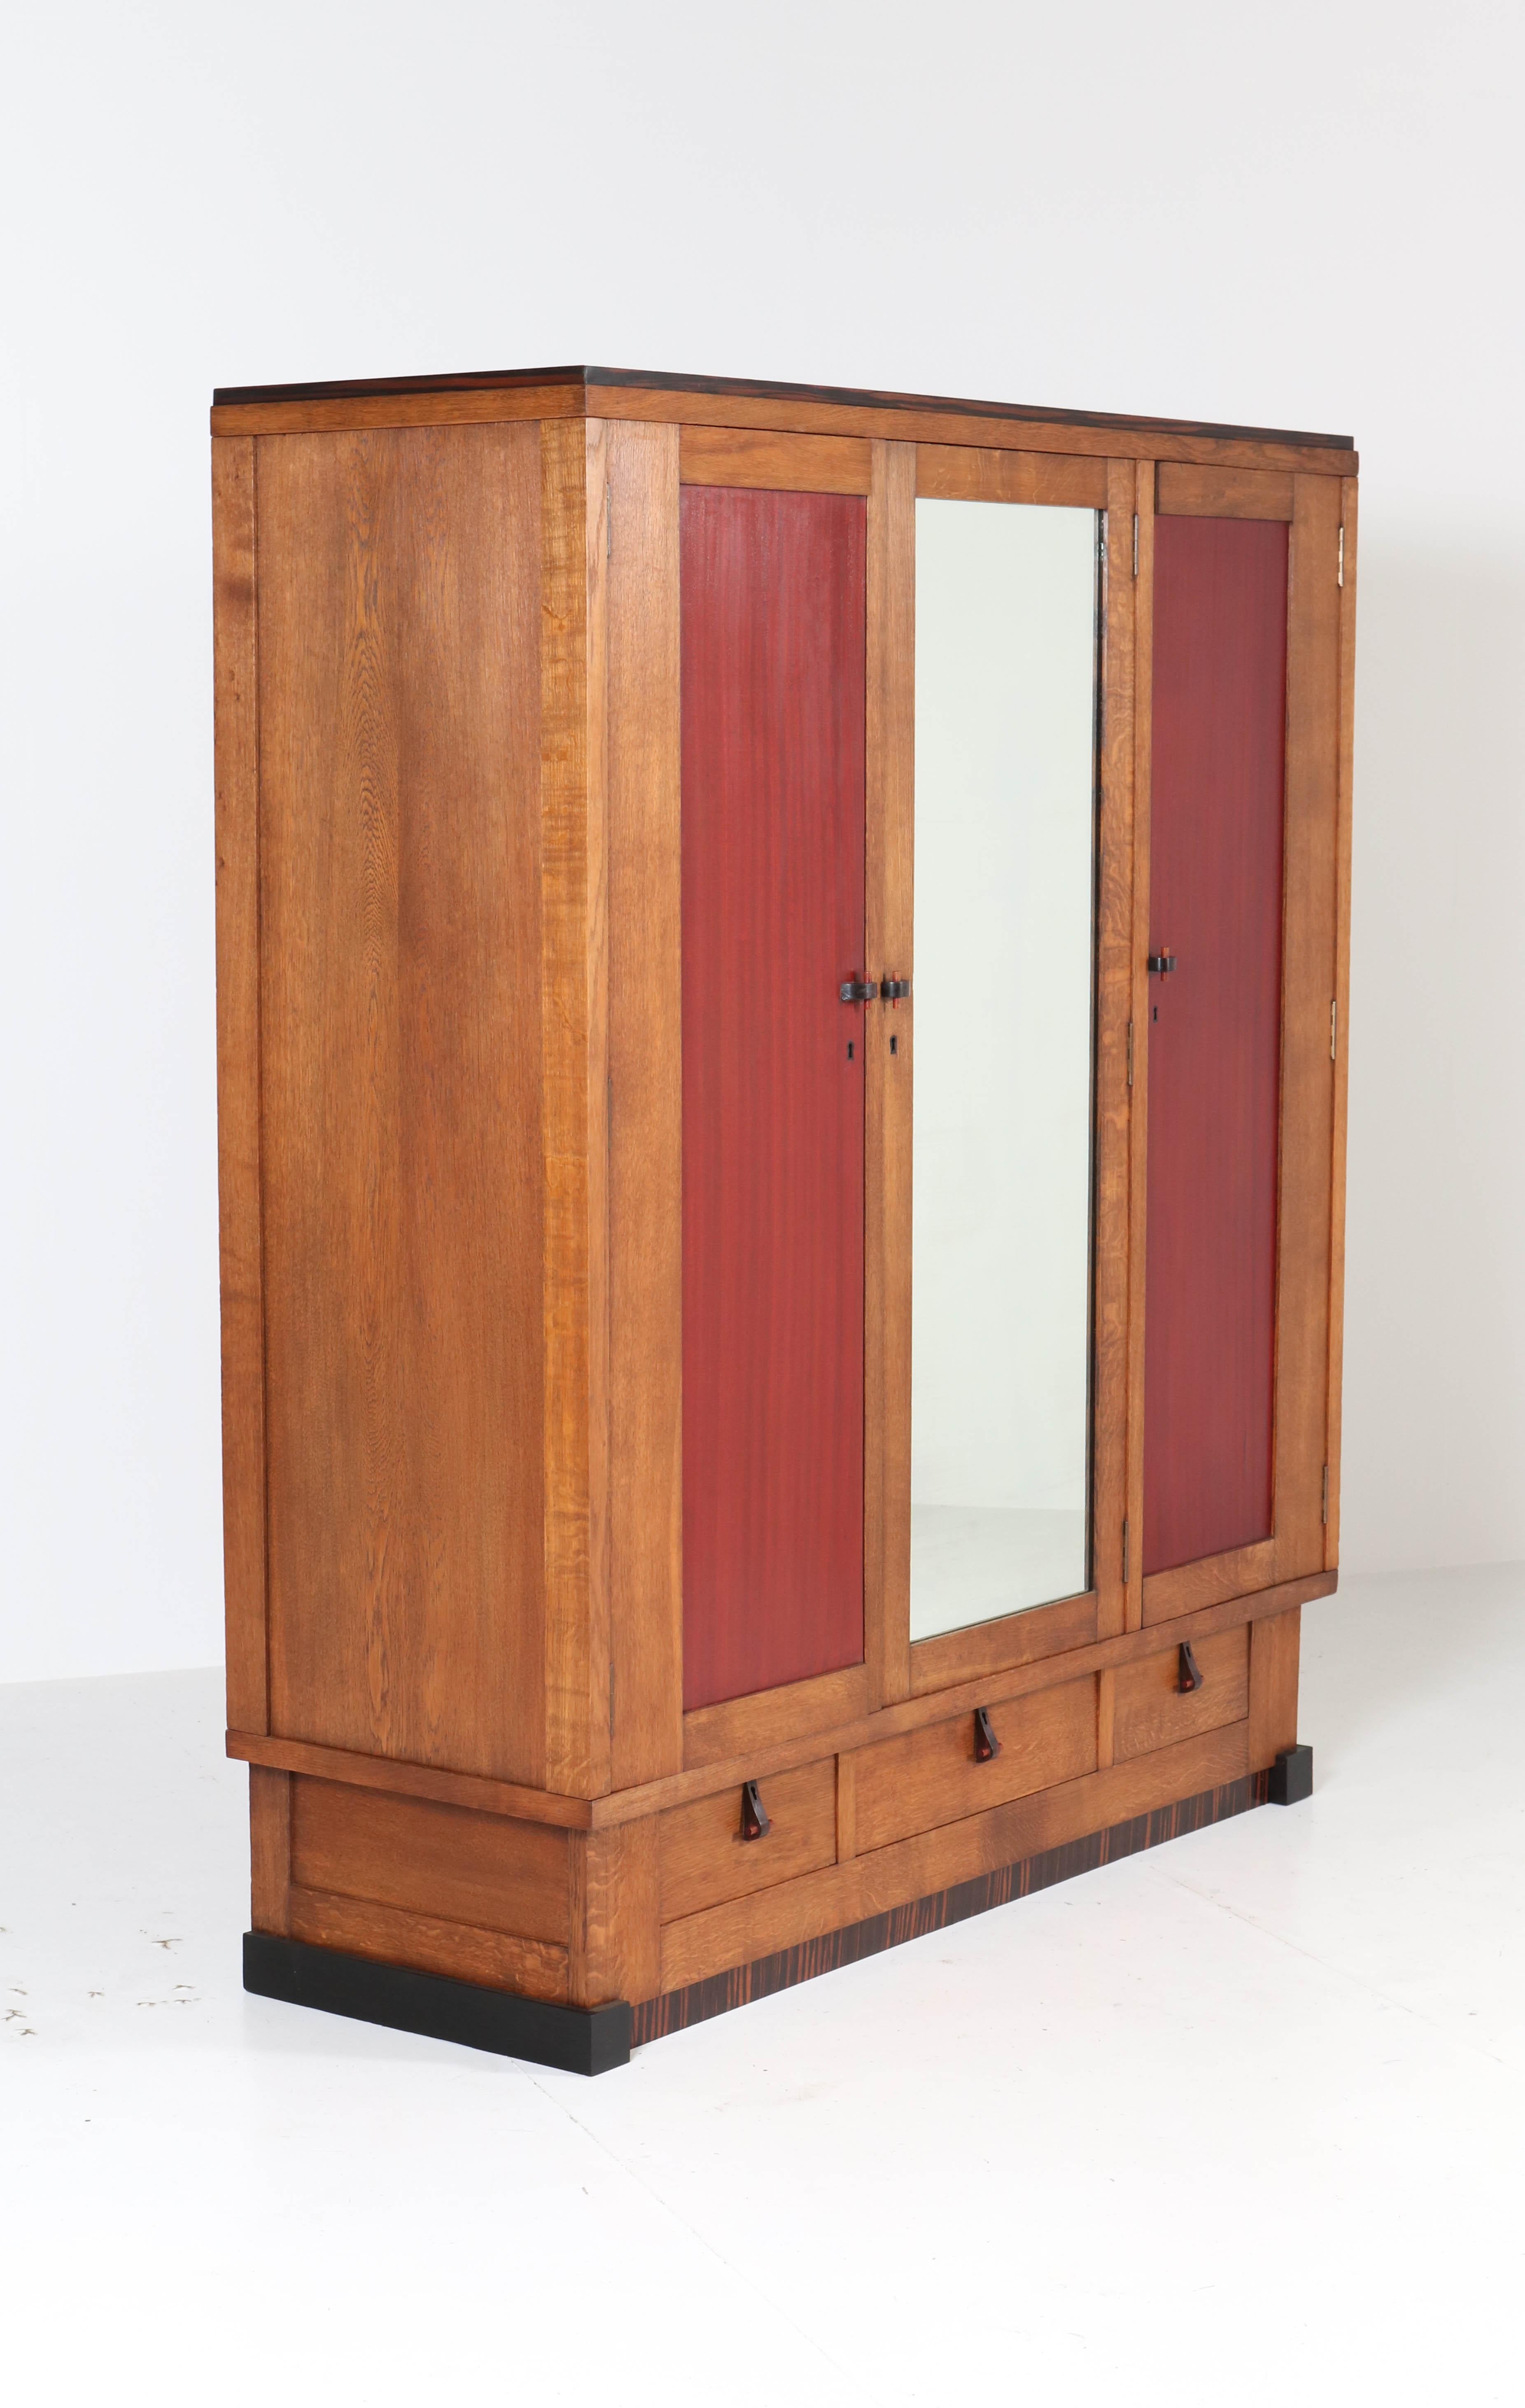 Magnificent and rare Art Deco Amsterdam School wardrobe or armoir.
Design by J.J. Zijfers Amsterdam.
Striking Dutch design from the twenties.
Solid oak with solid ebony Macassar handles and lining.
Behind the door with mirror, there are four